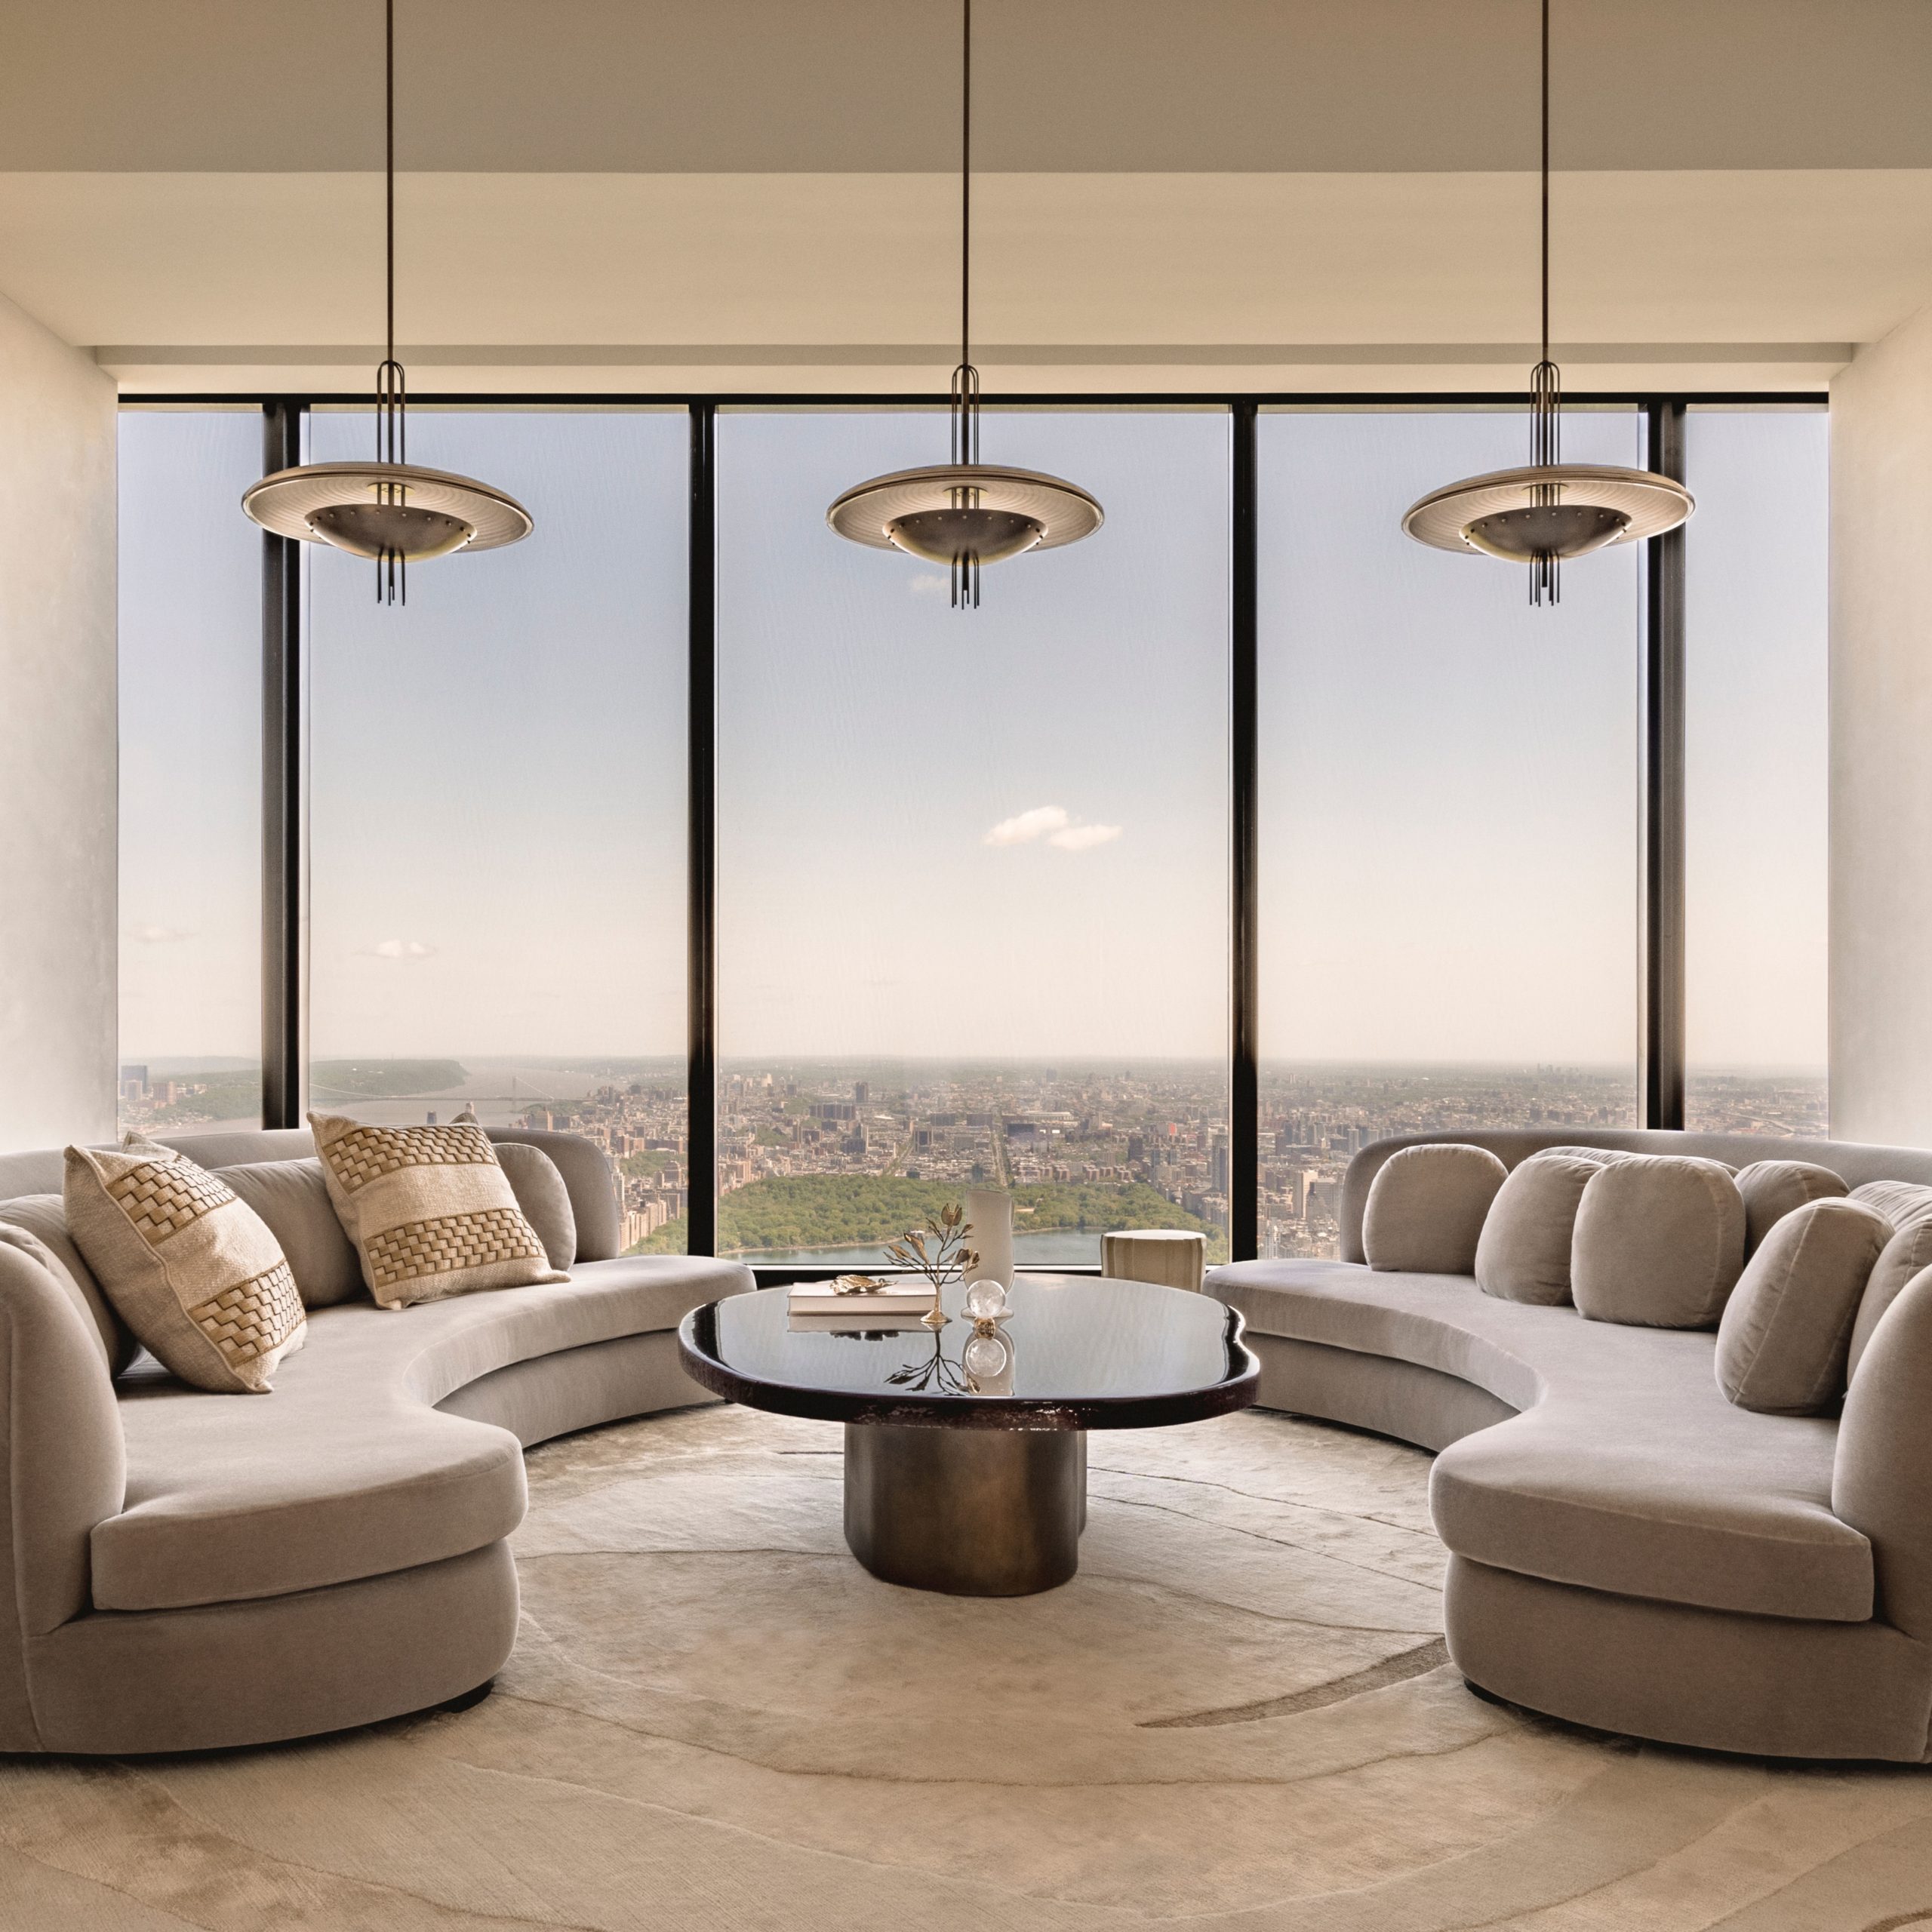 <a href="https://theinvisiblecollection.com/showrooms/">Invisible Collection Penthouse</a>